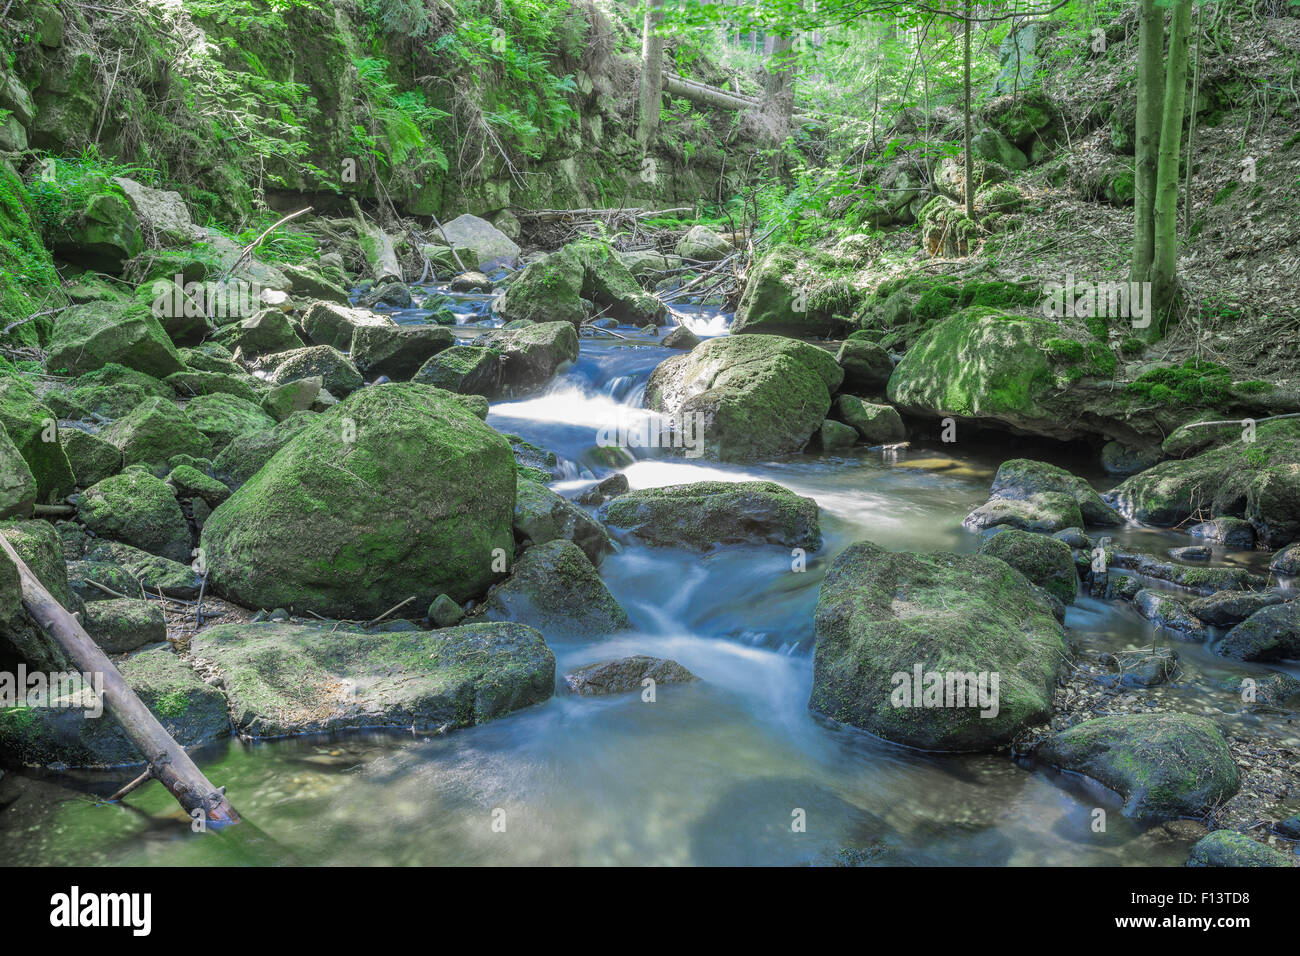 Wild mountain river bed in the dry summer Bystrzyca stones boulders logs covered with moss Stock Photo